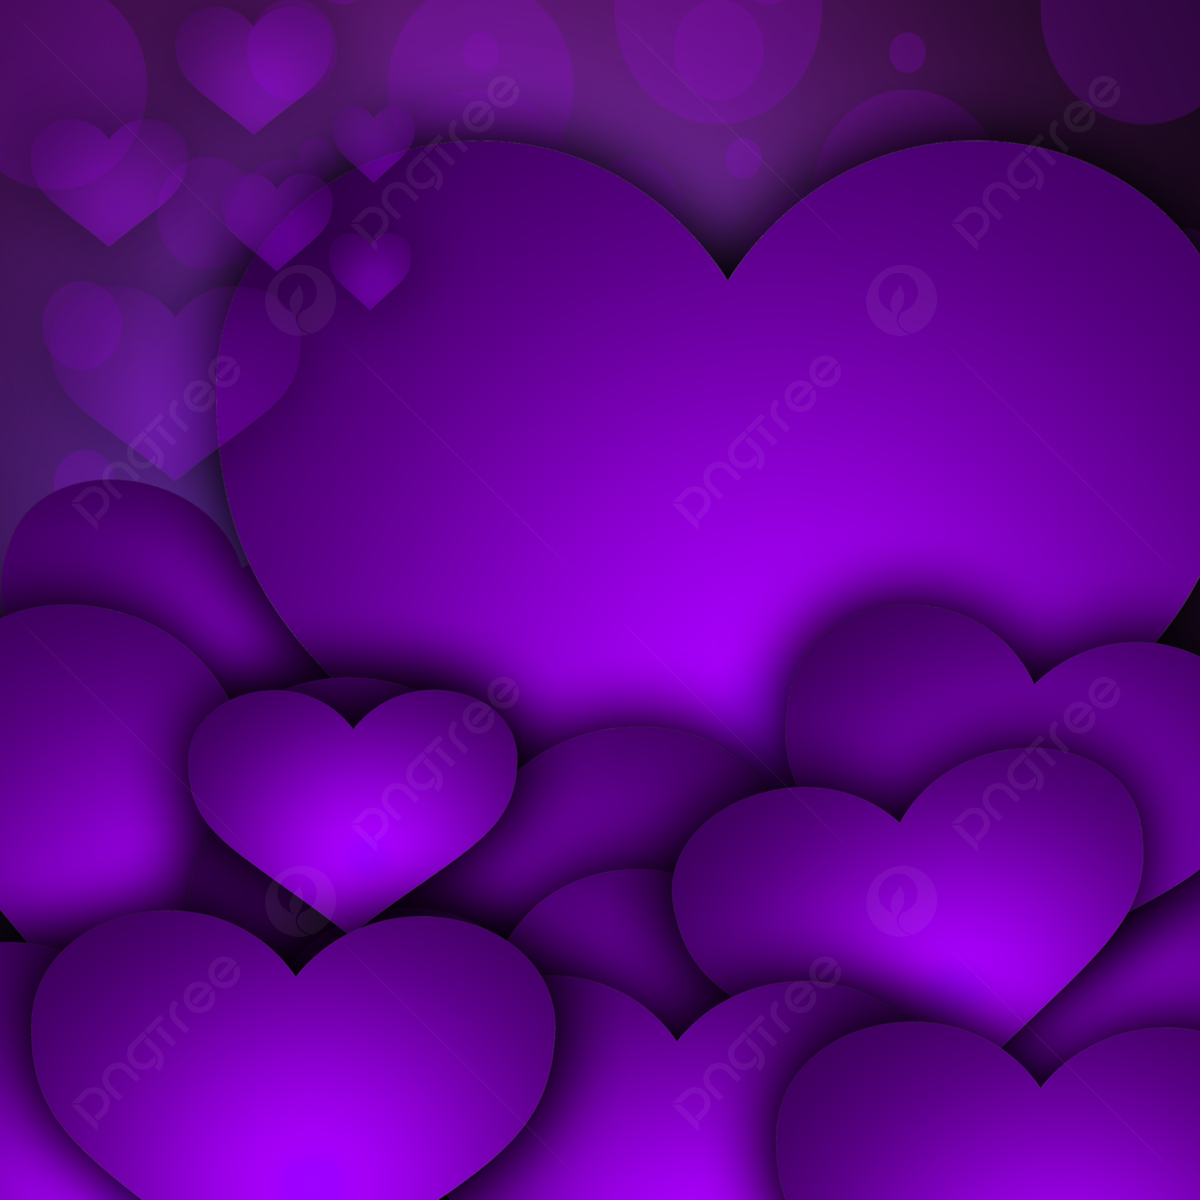 Beautiful Hearts With Support Of Alot Valentine S Special Wallpaper Background, Background With Effects, Day To Show Affections, Heart Gif Background Image for Free Download